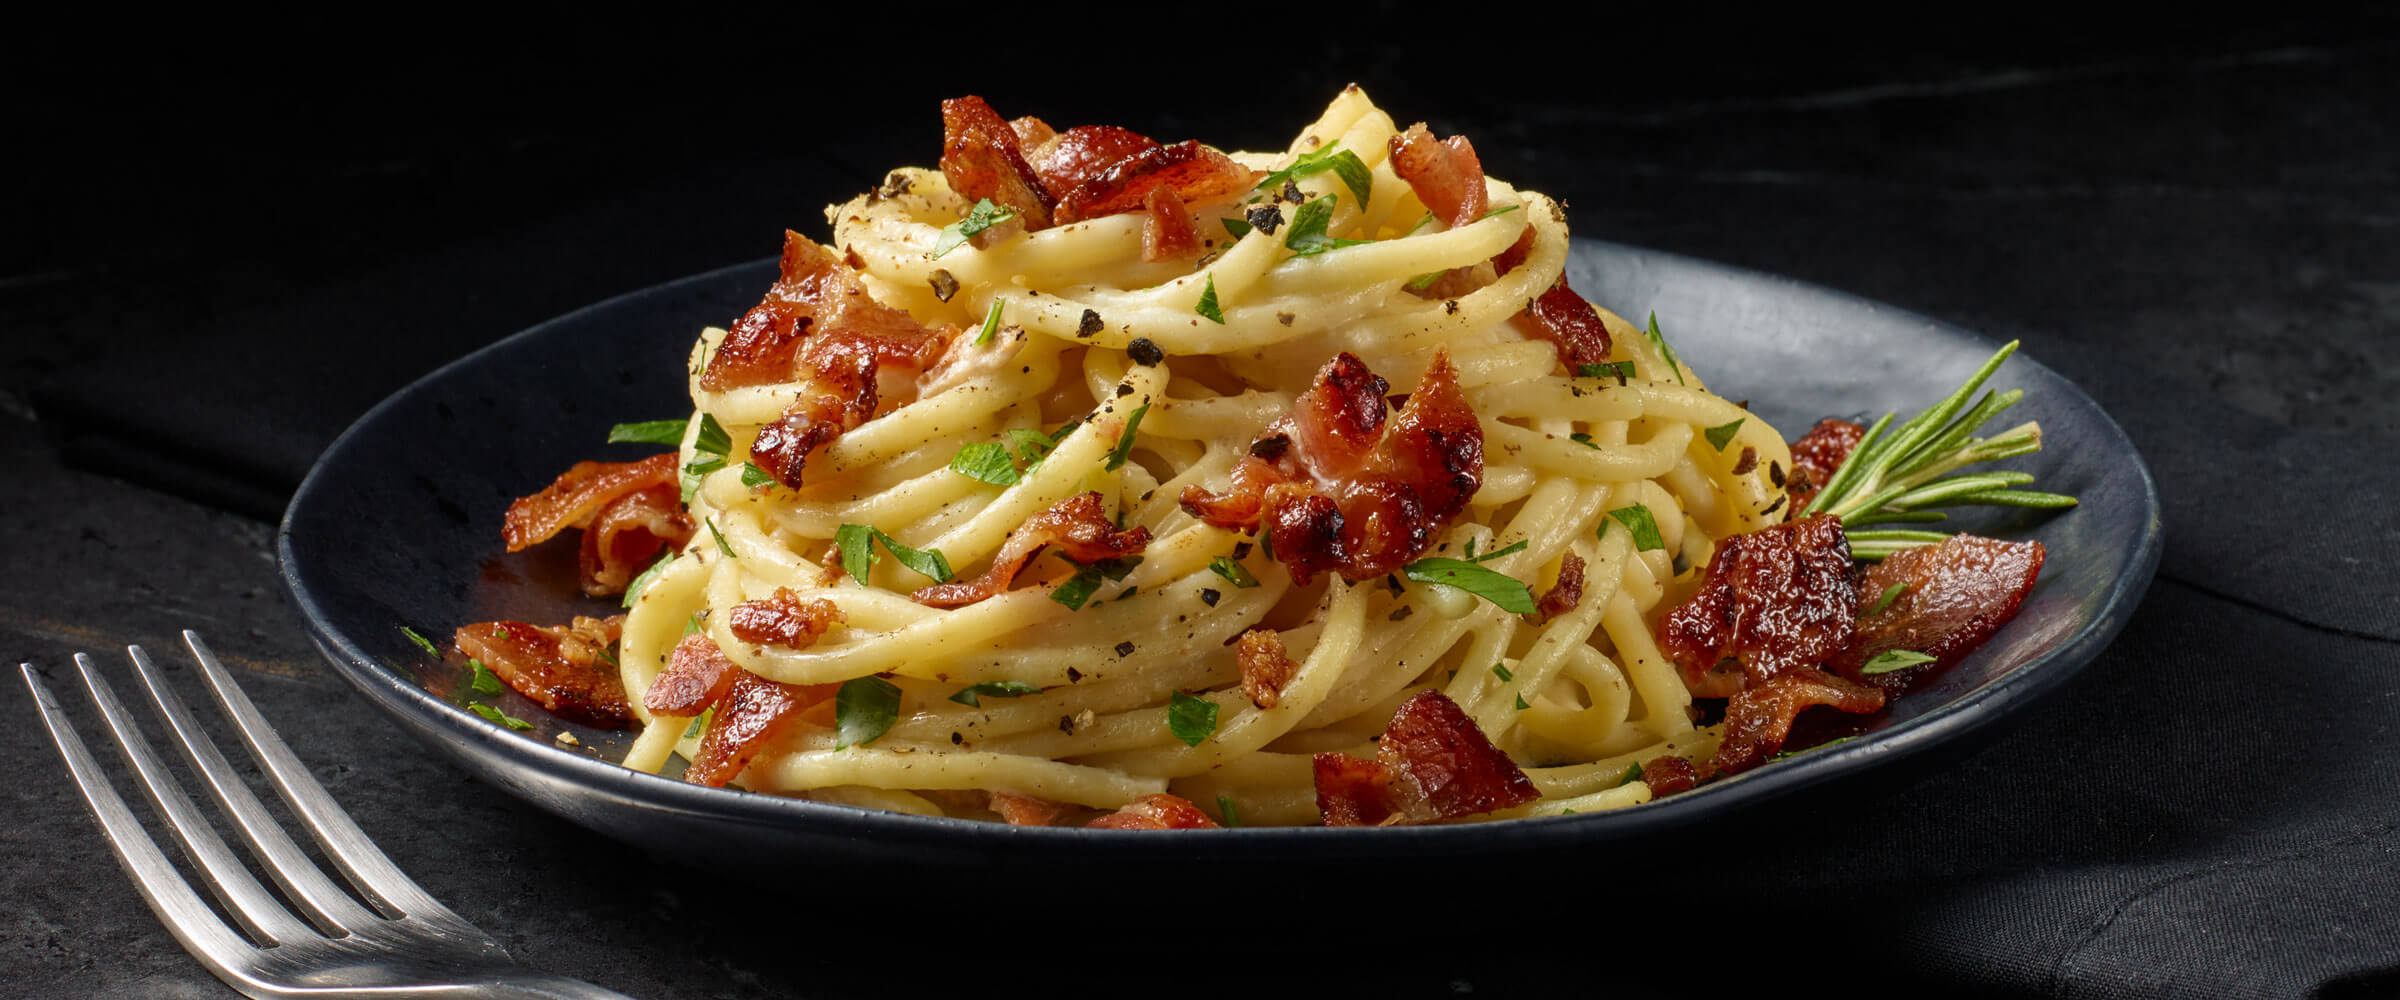 Creamy Pasta with Bacon in black bowl